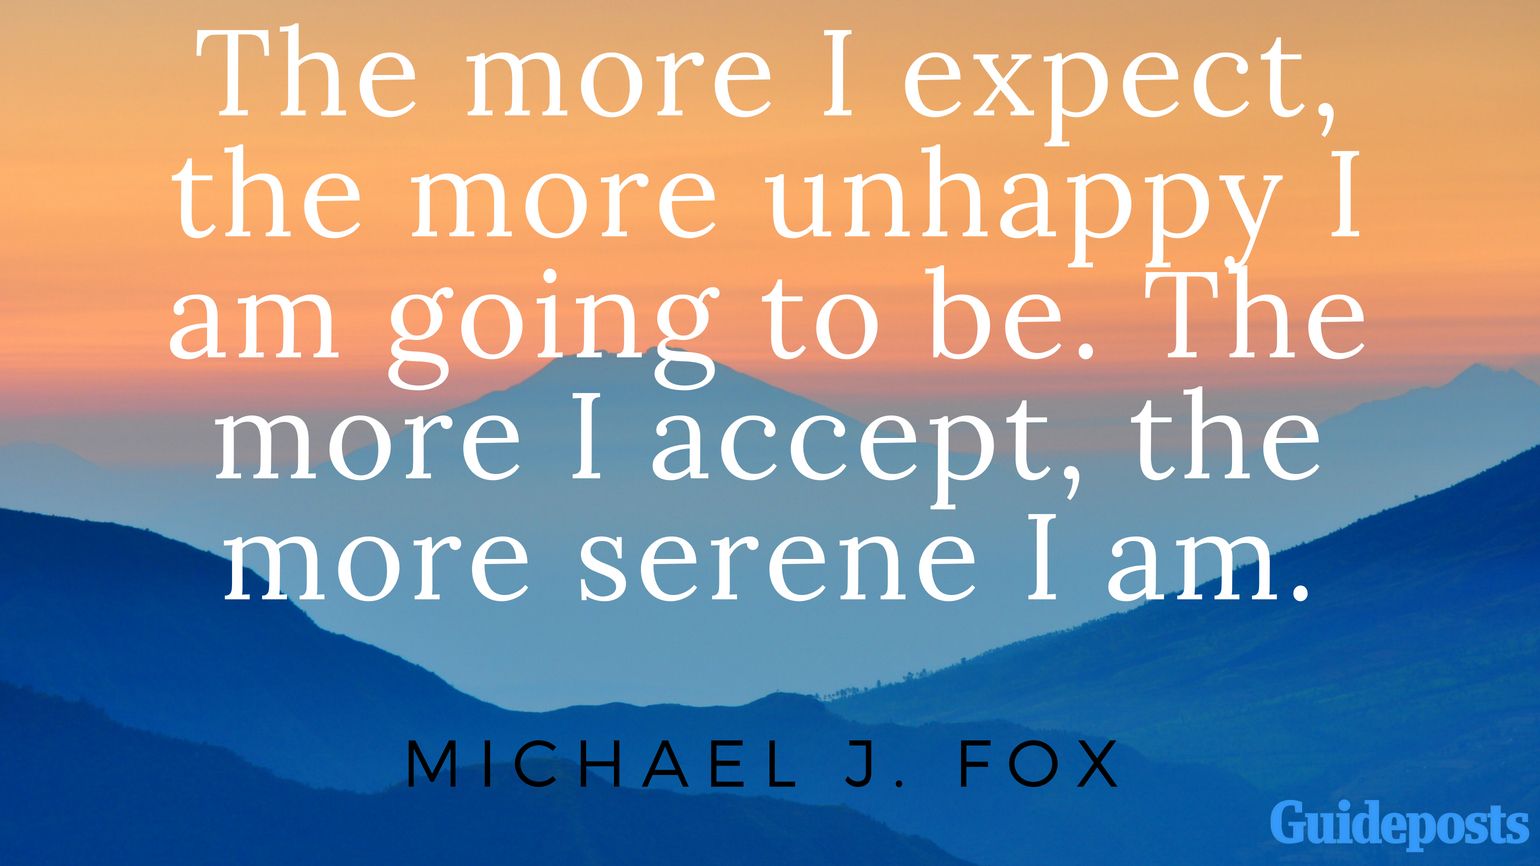 The more I expect, the more unhappy I am going to be. The more I accept, the more serene I am. - Michael J. Fox